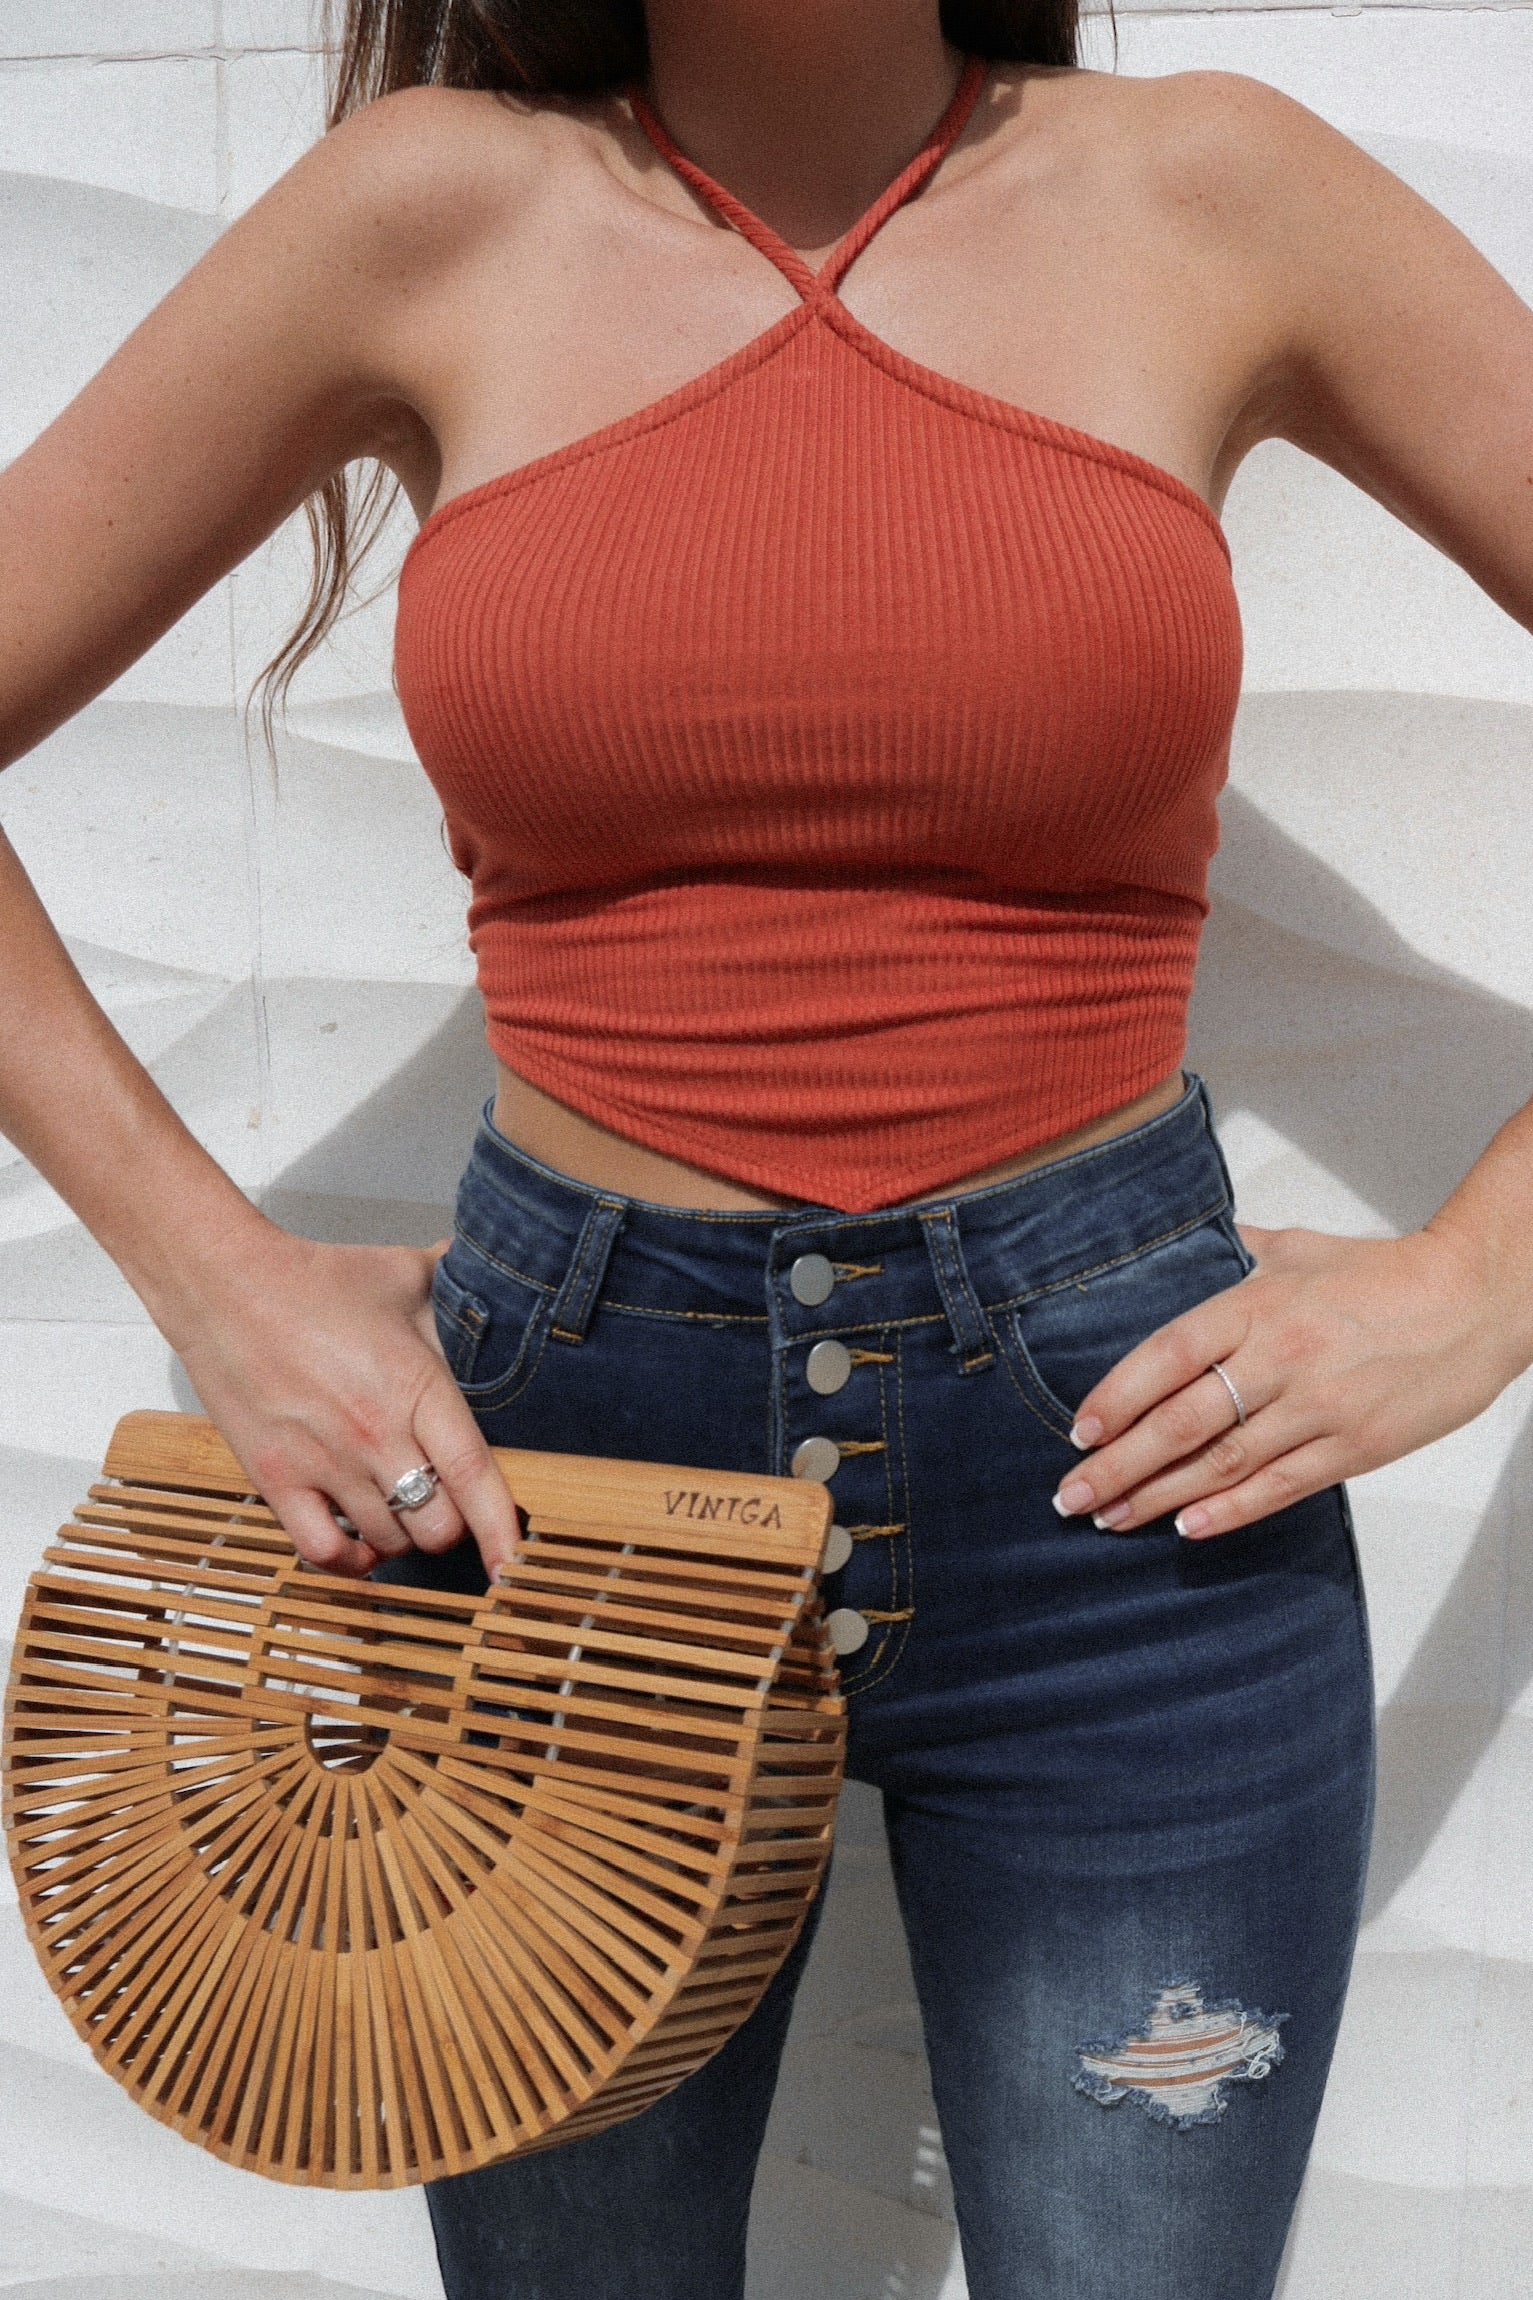 Ribbed Halter Top in Terra Cotta with V detail at Scarlette The Label, an online fashion boutique for women. Paired with large wooden bag.